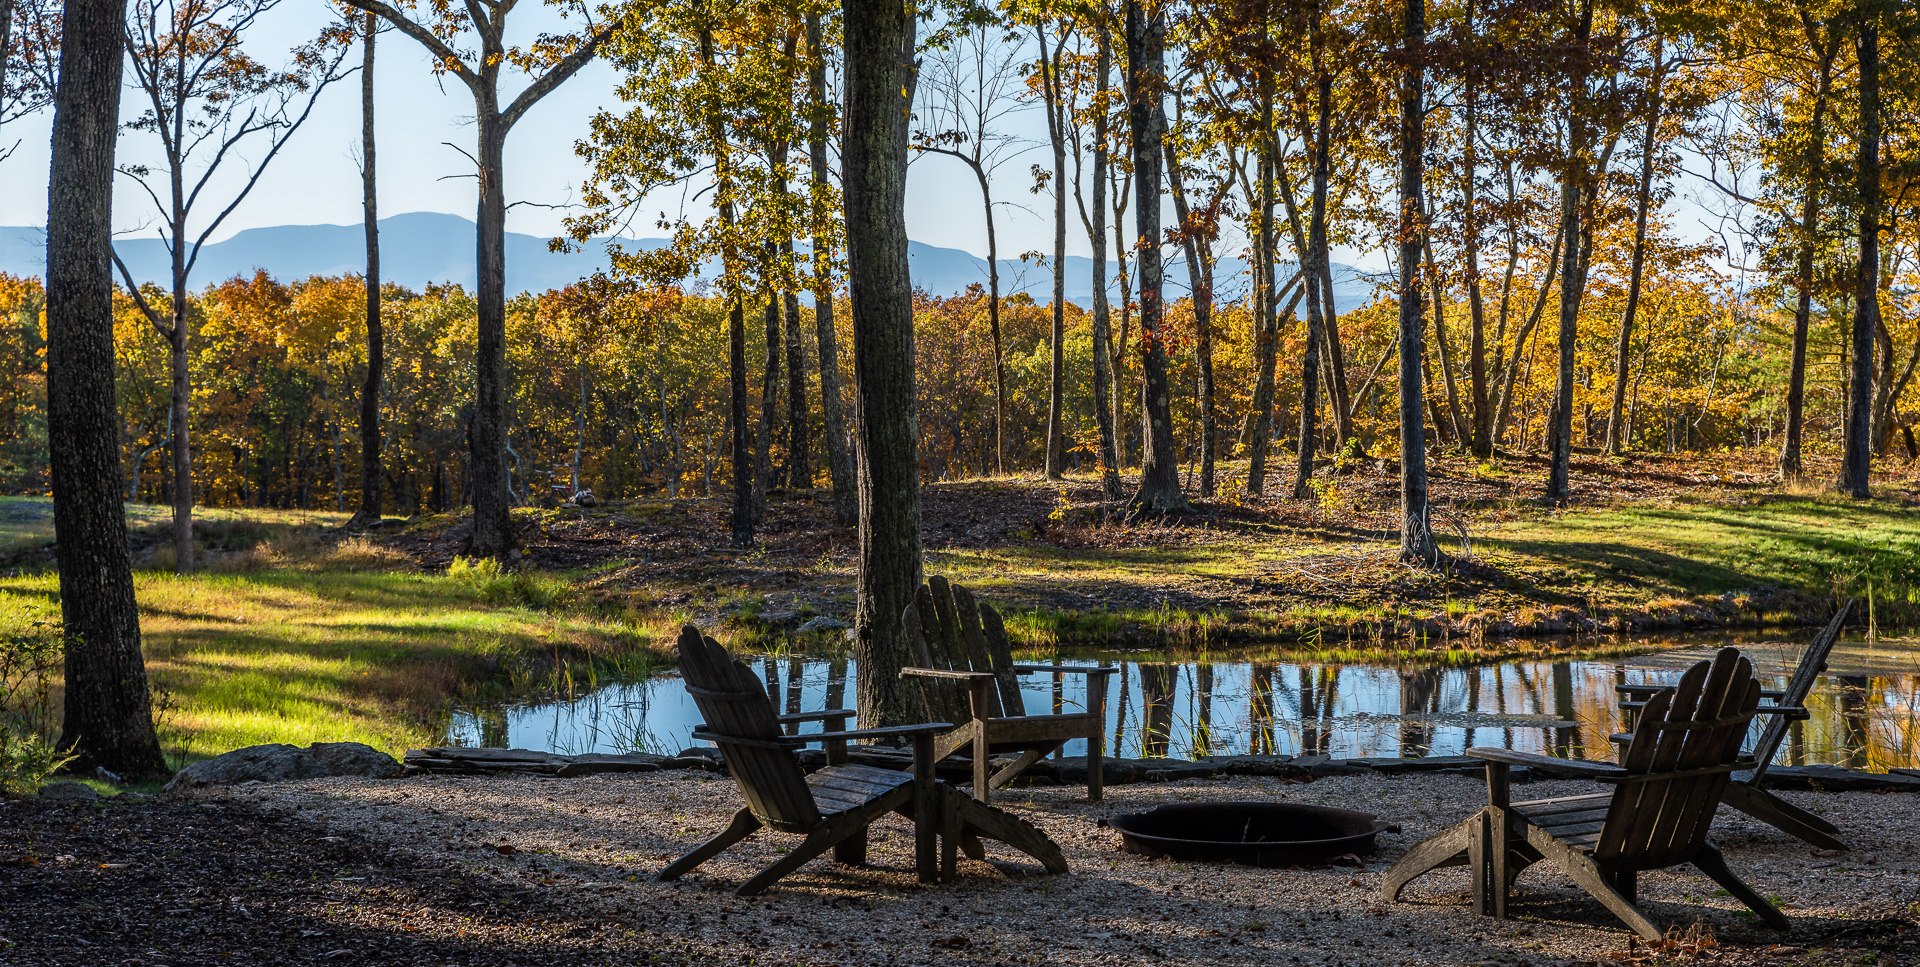 Adirondack chairs grouped around a pond with mountain views in the background